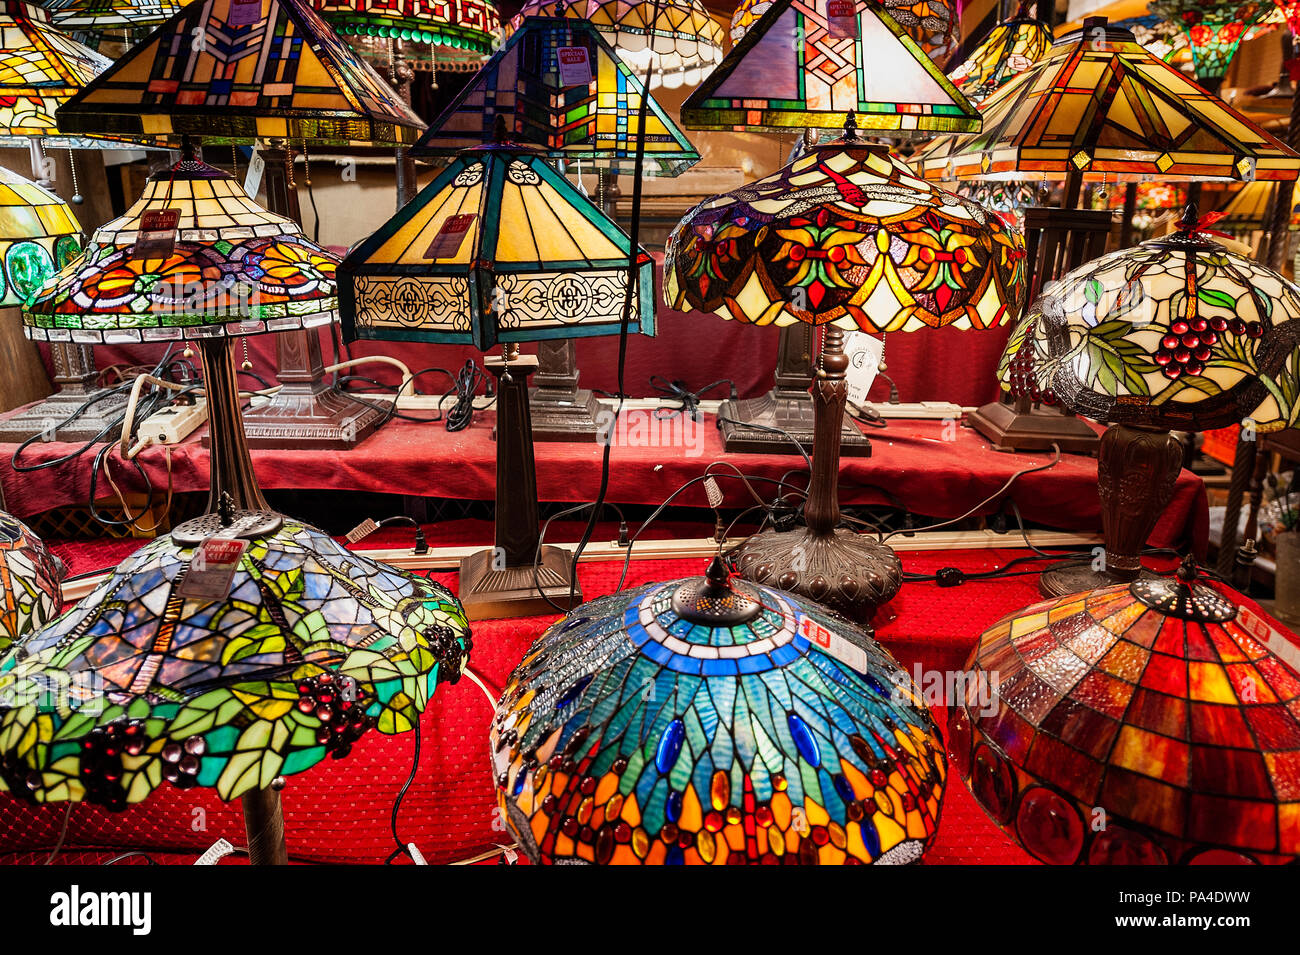 Tiffany lamps on display in a store. Stock Photo